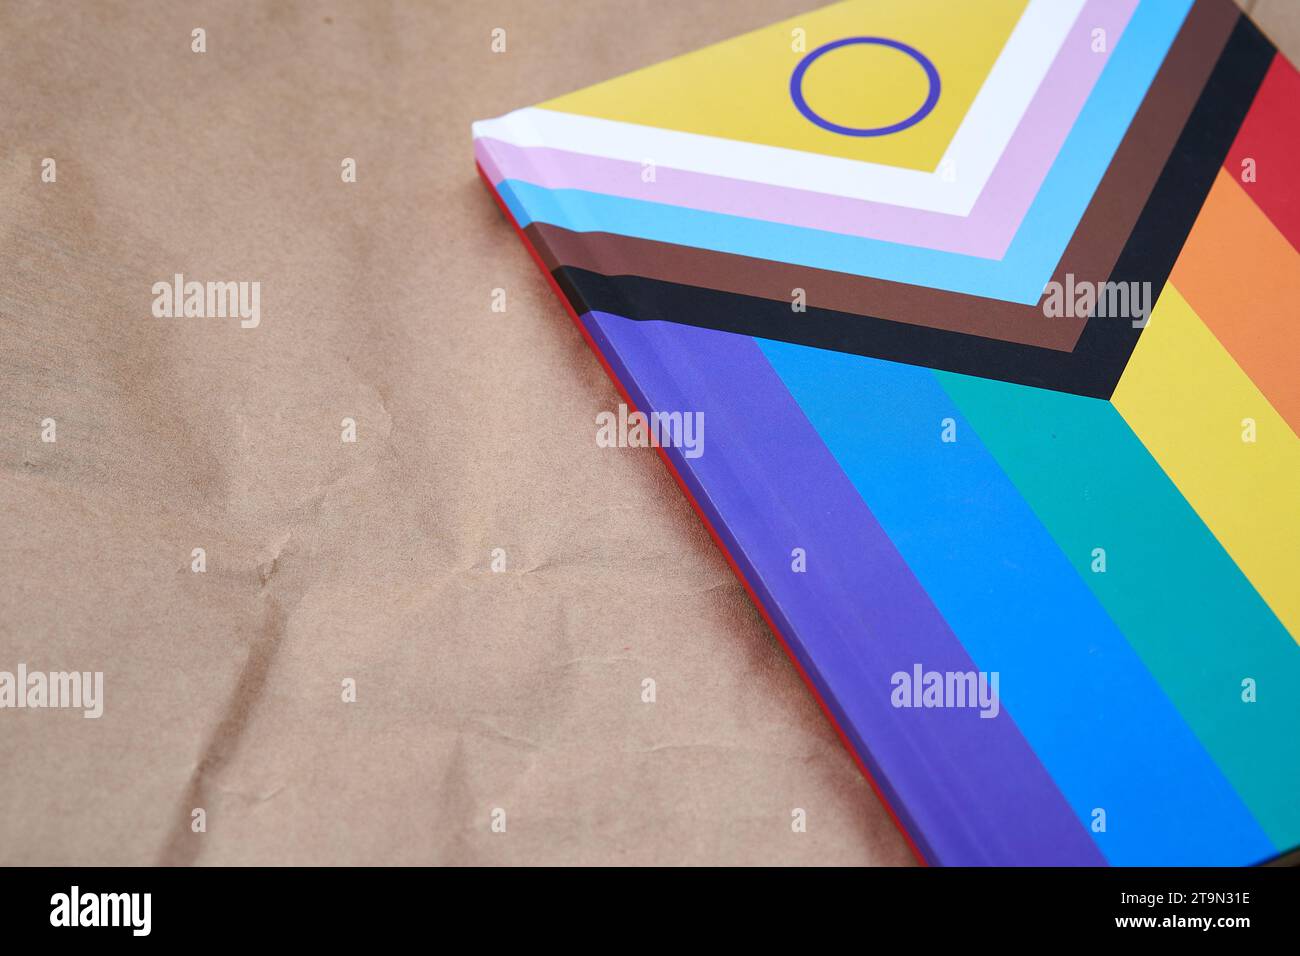 Notebook with the lgbtiq+ flag on a cardboard texture background. Stock Photo